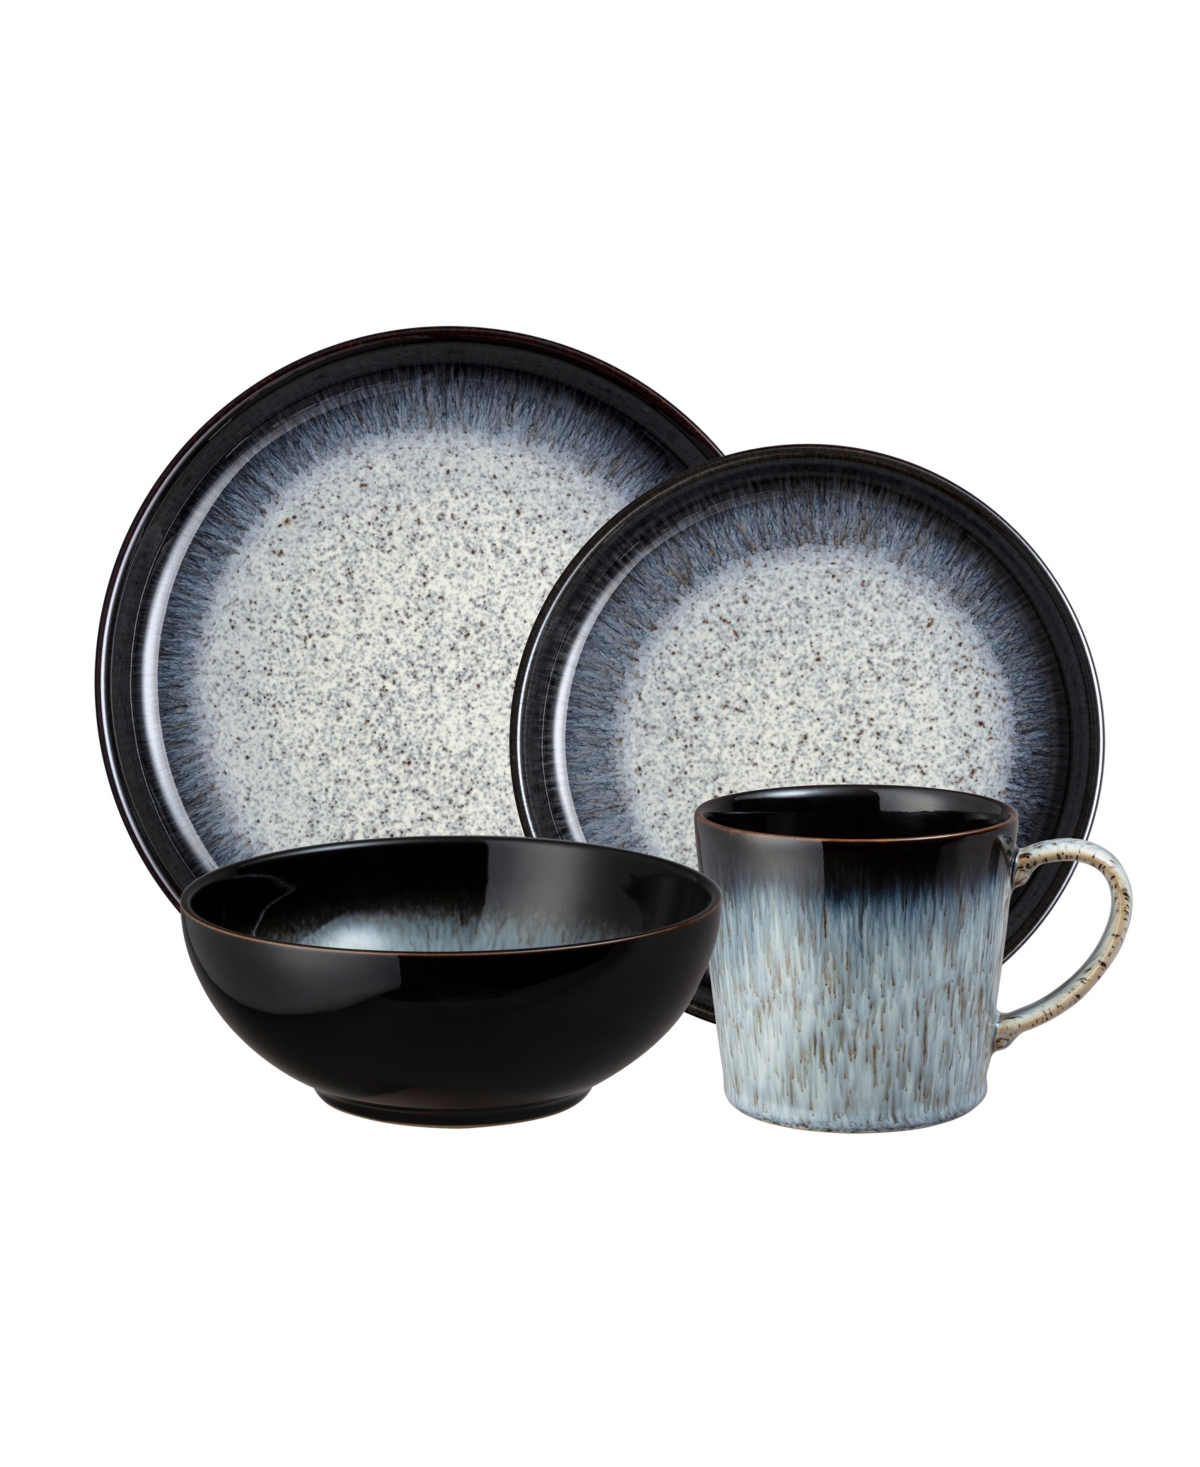 Halo Coupe 4 Piece Place setting - Black